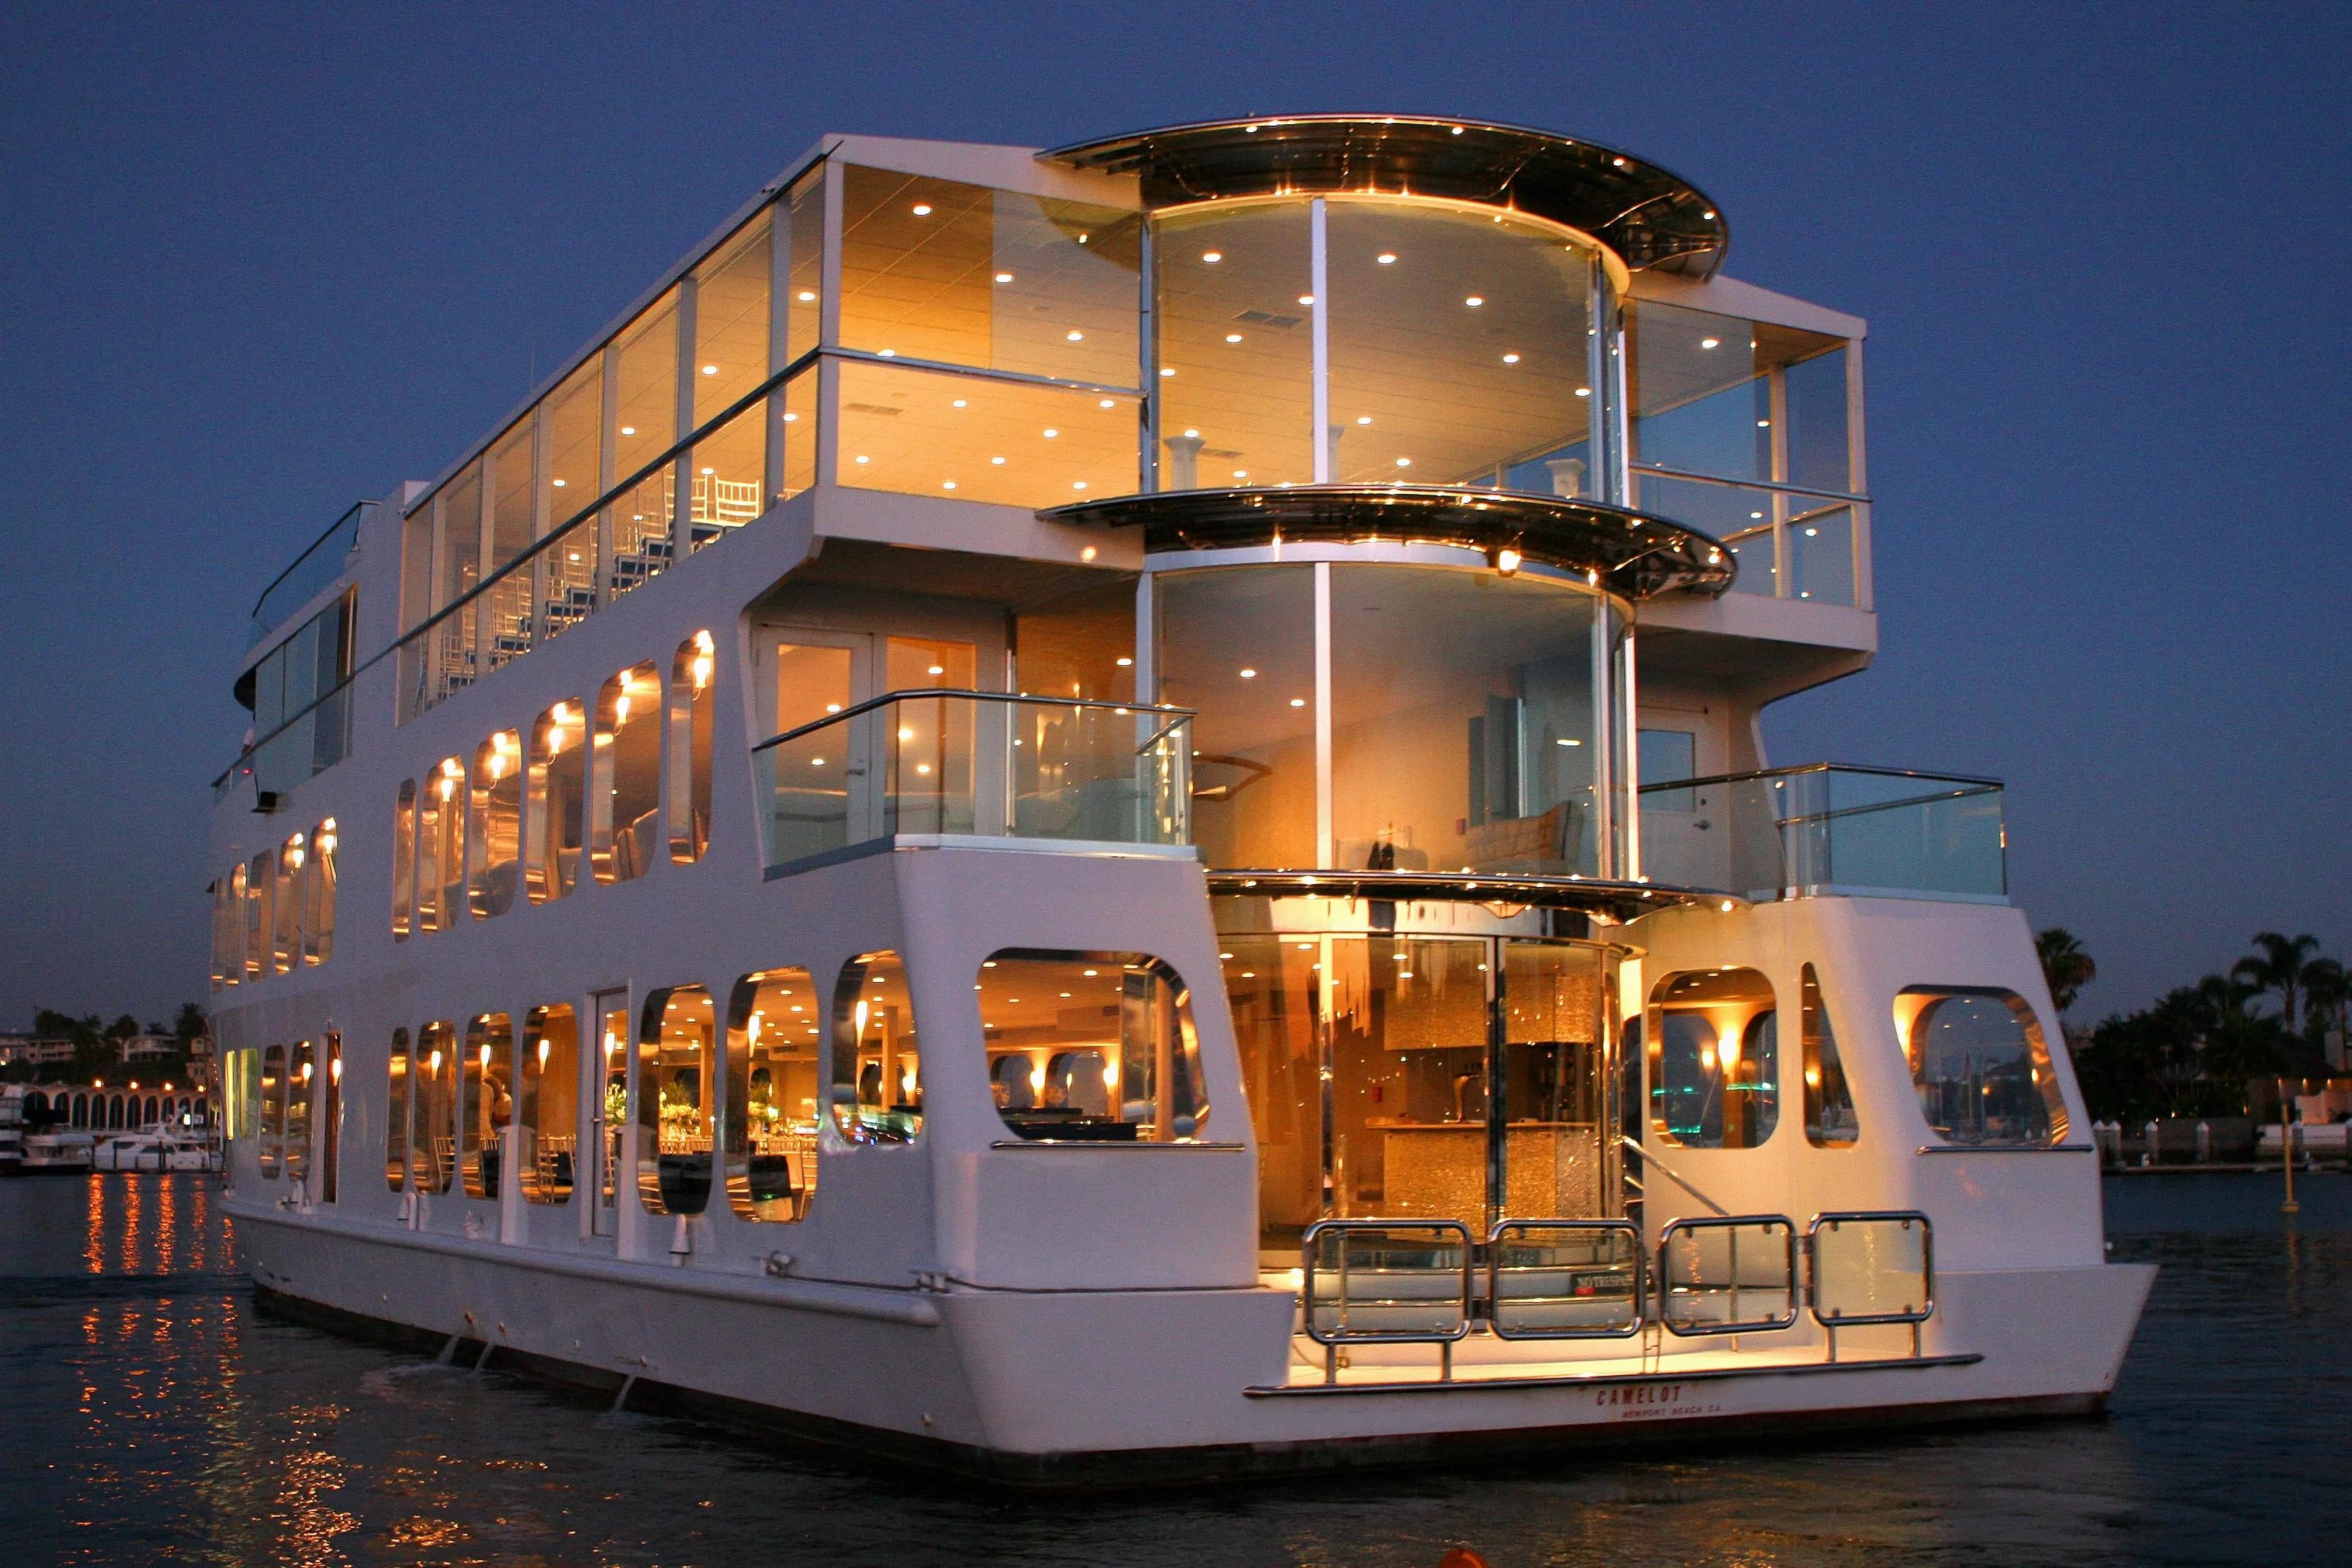 A large, multi-deck luxury yacht illuminated with warm lights at dusk. The sleek, modern vessel features expansive glass windows, multiple balconies, and polished metal finishes. It is anchored on a calm body of water during the Macy’s fireworks show, with a beautiful evening sky in the background. This is NYC Water Cruises Inc.'s July 4th: Eternity Dinner Cruise.